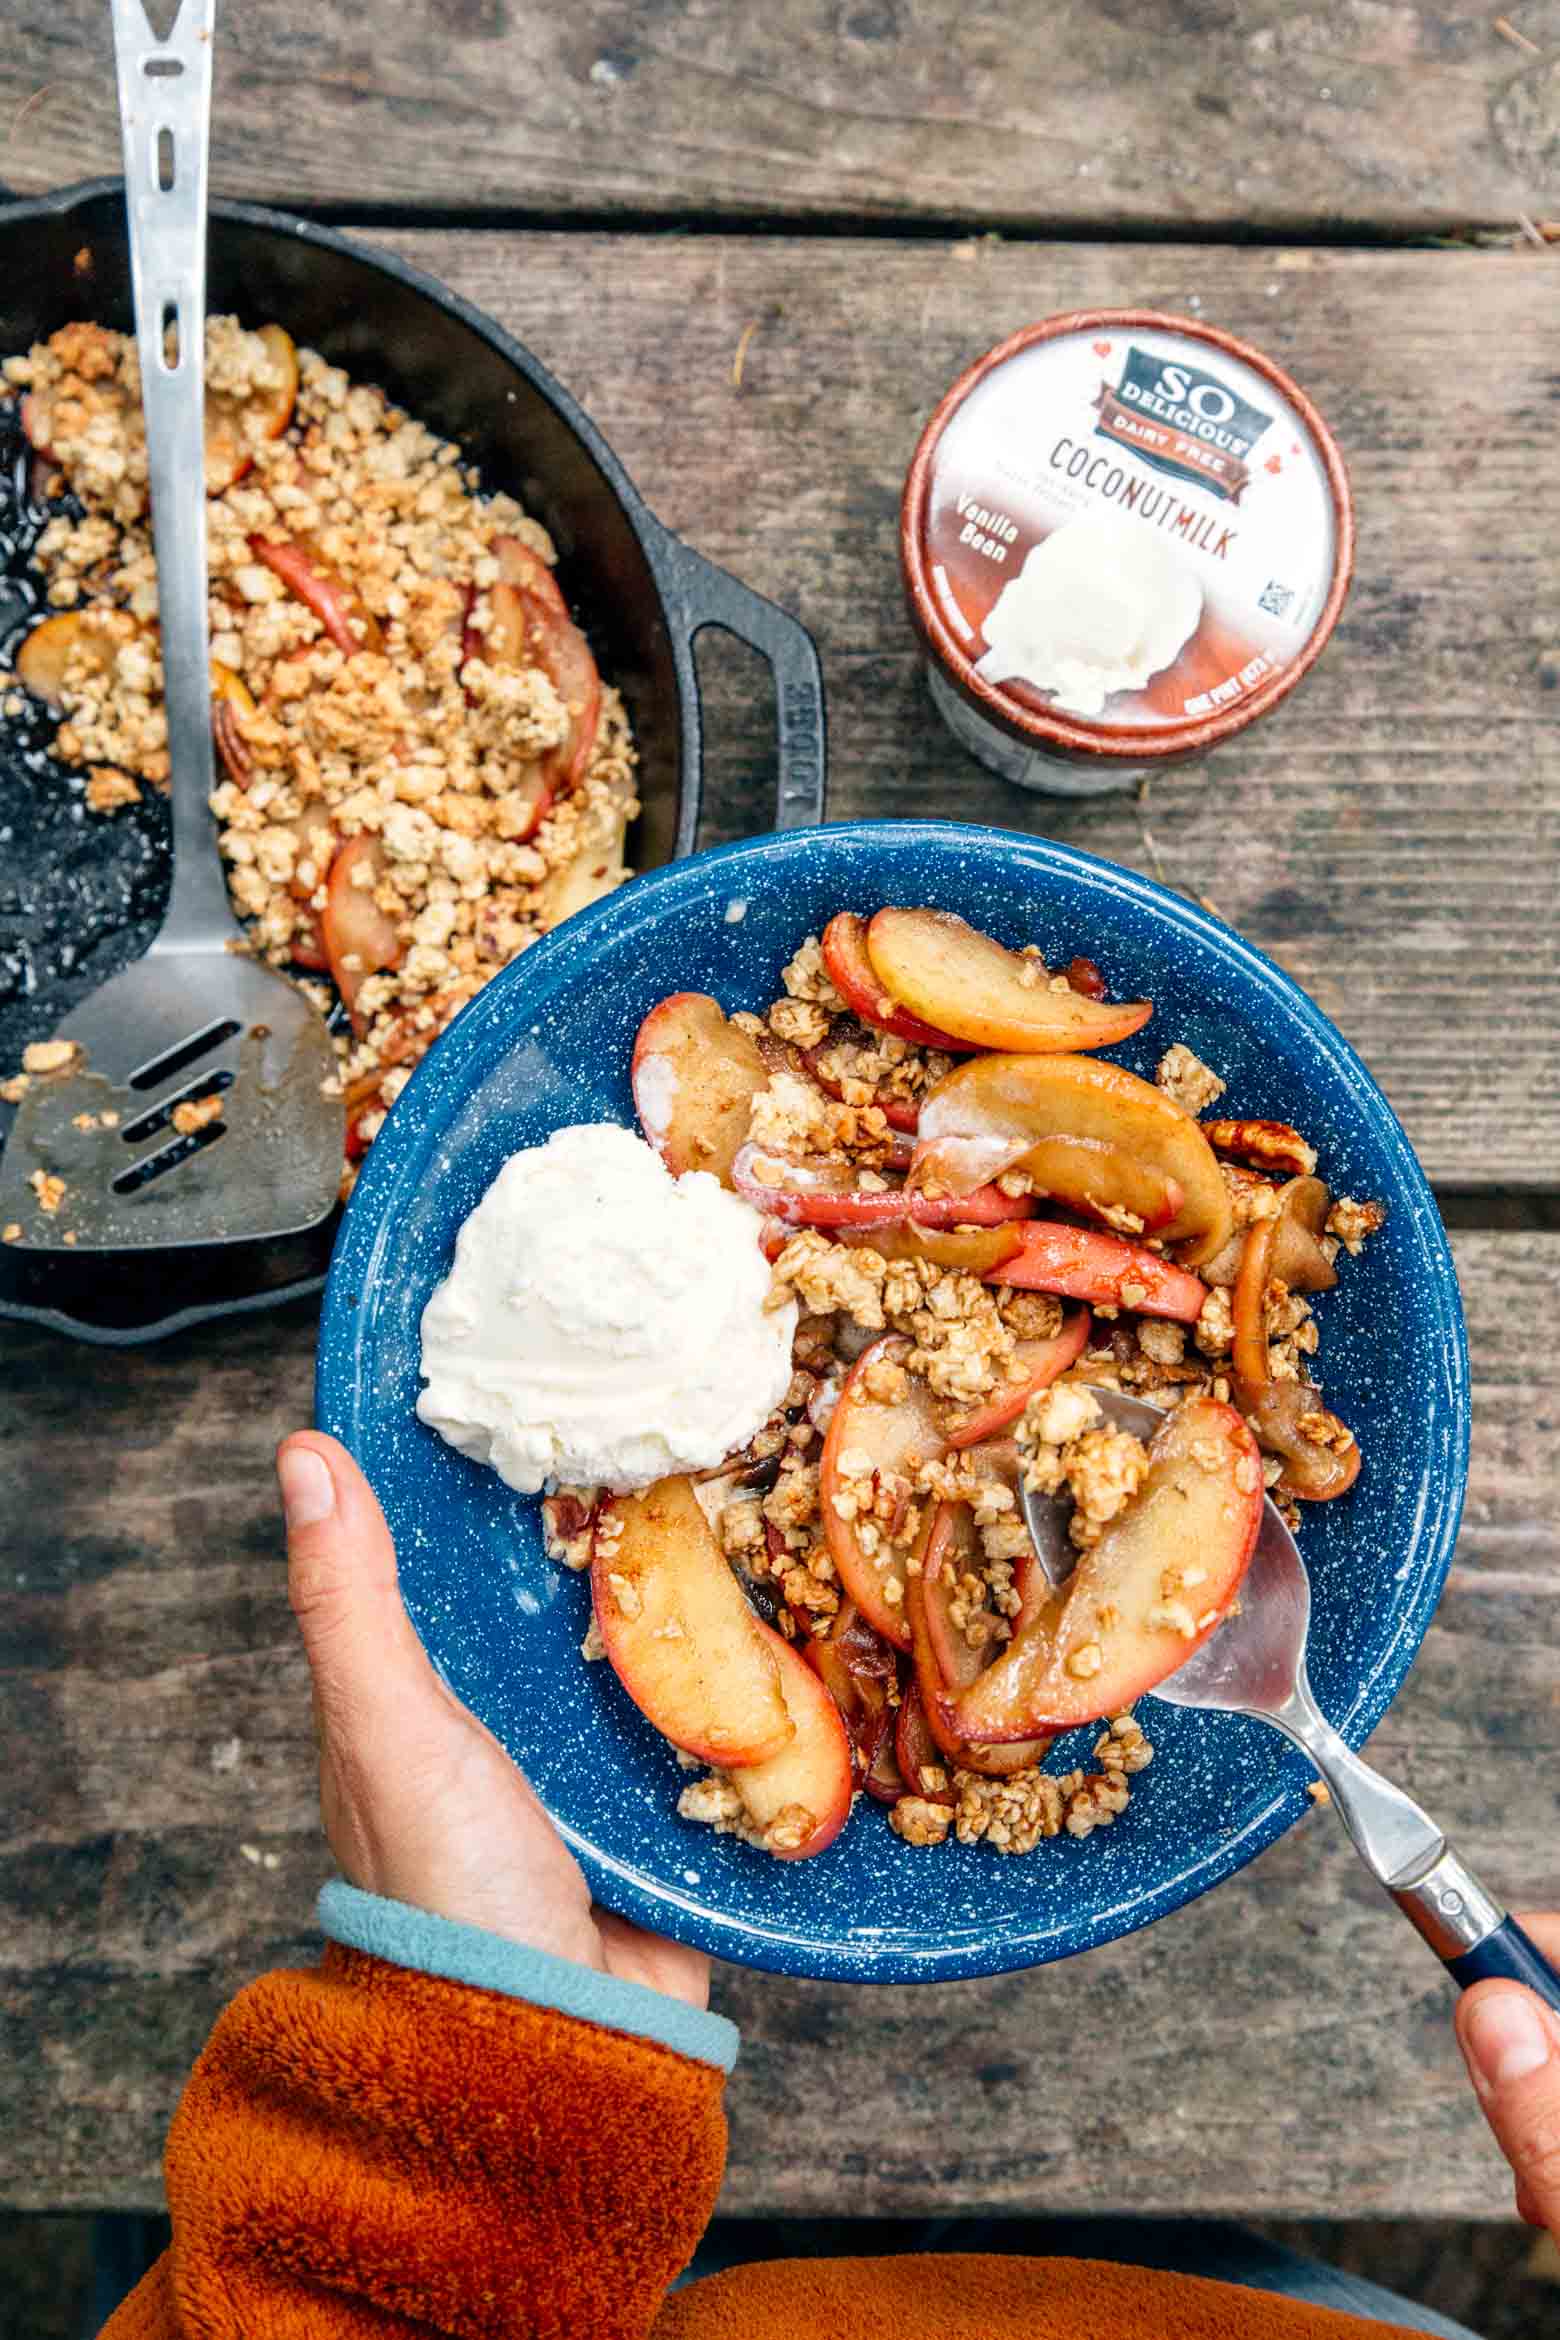 https://www.freshoffthegrid.com/wp-content/uploads/2017/09/campfire-apple-crisp-with-so-delicious-dairy-free-9.jpg